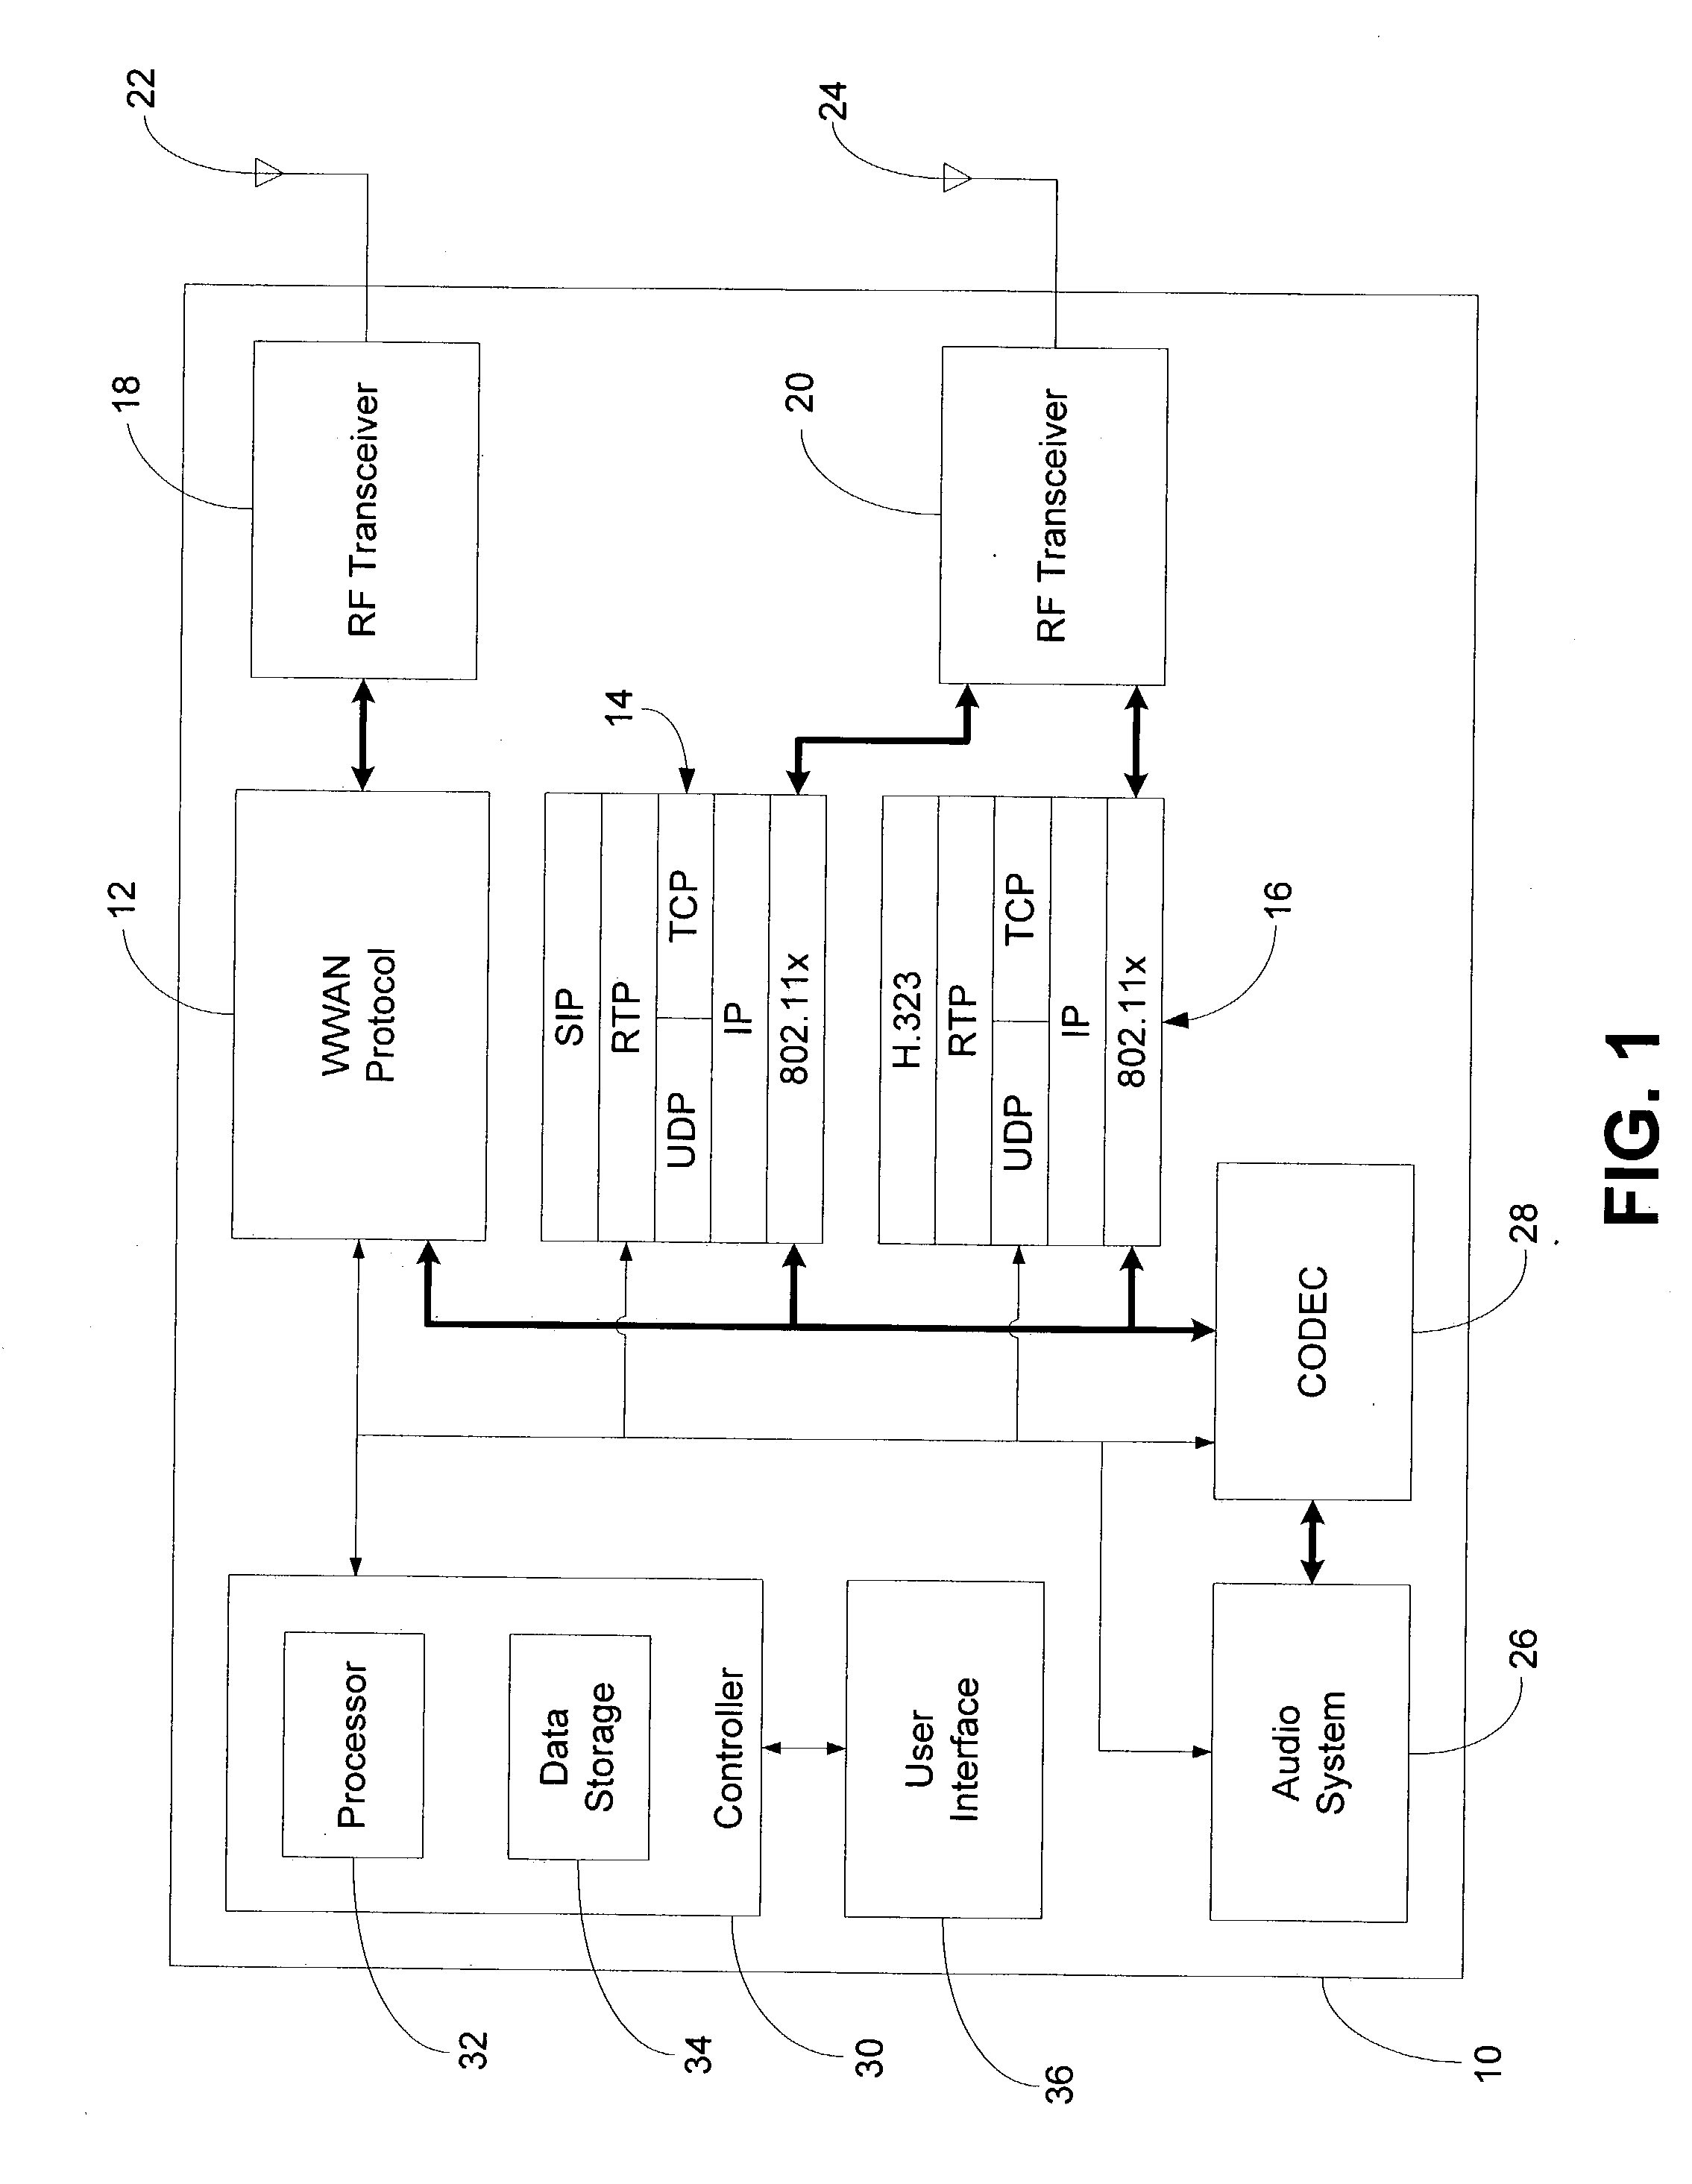 Multi-mode mobile station and method